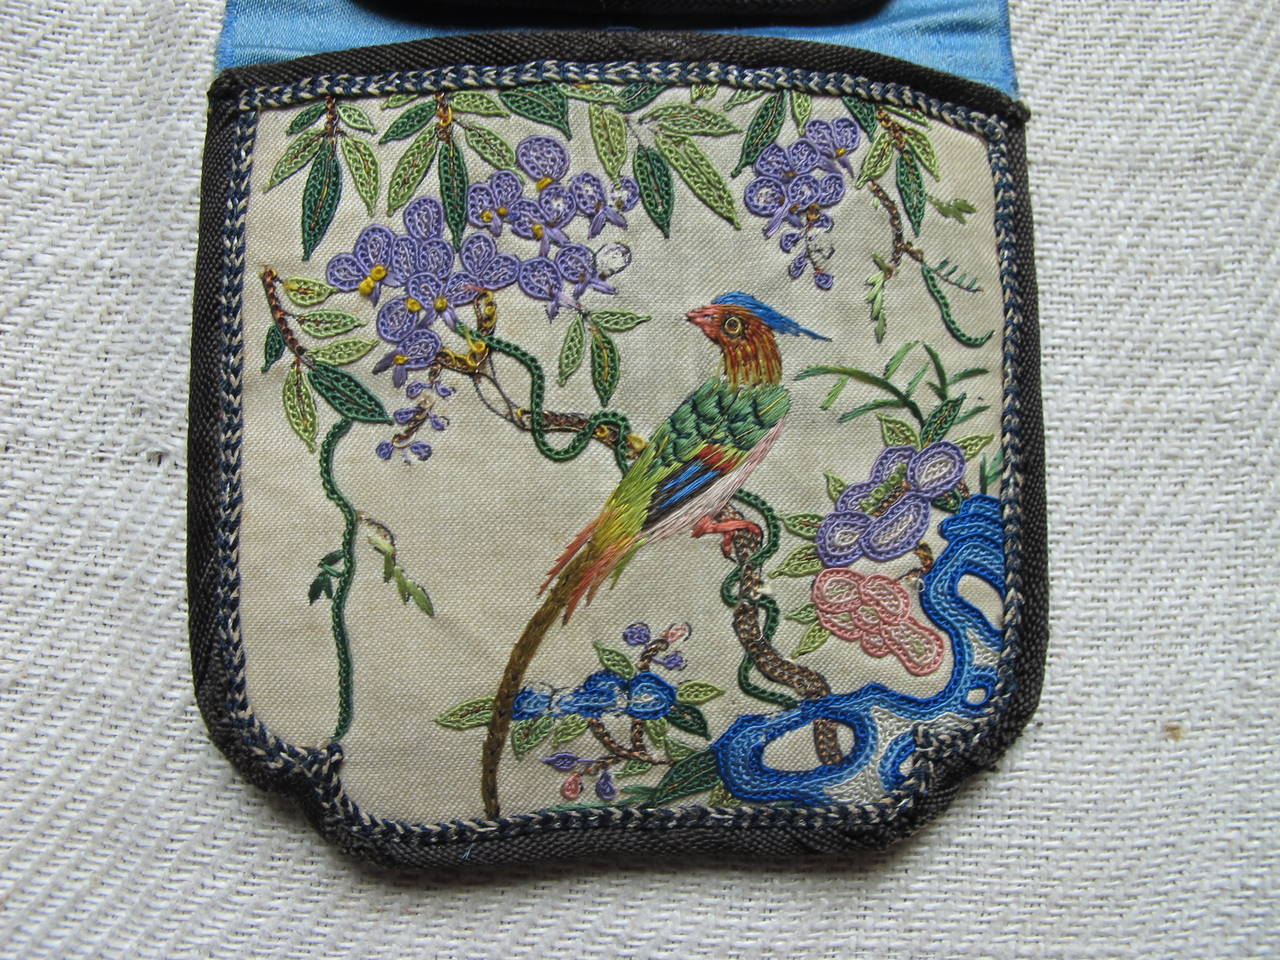 Small intricately embroidered small purse and pocket watch holder,